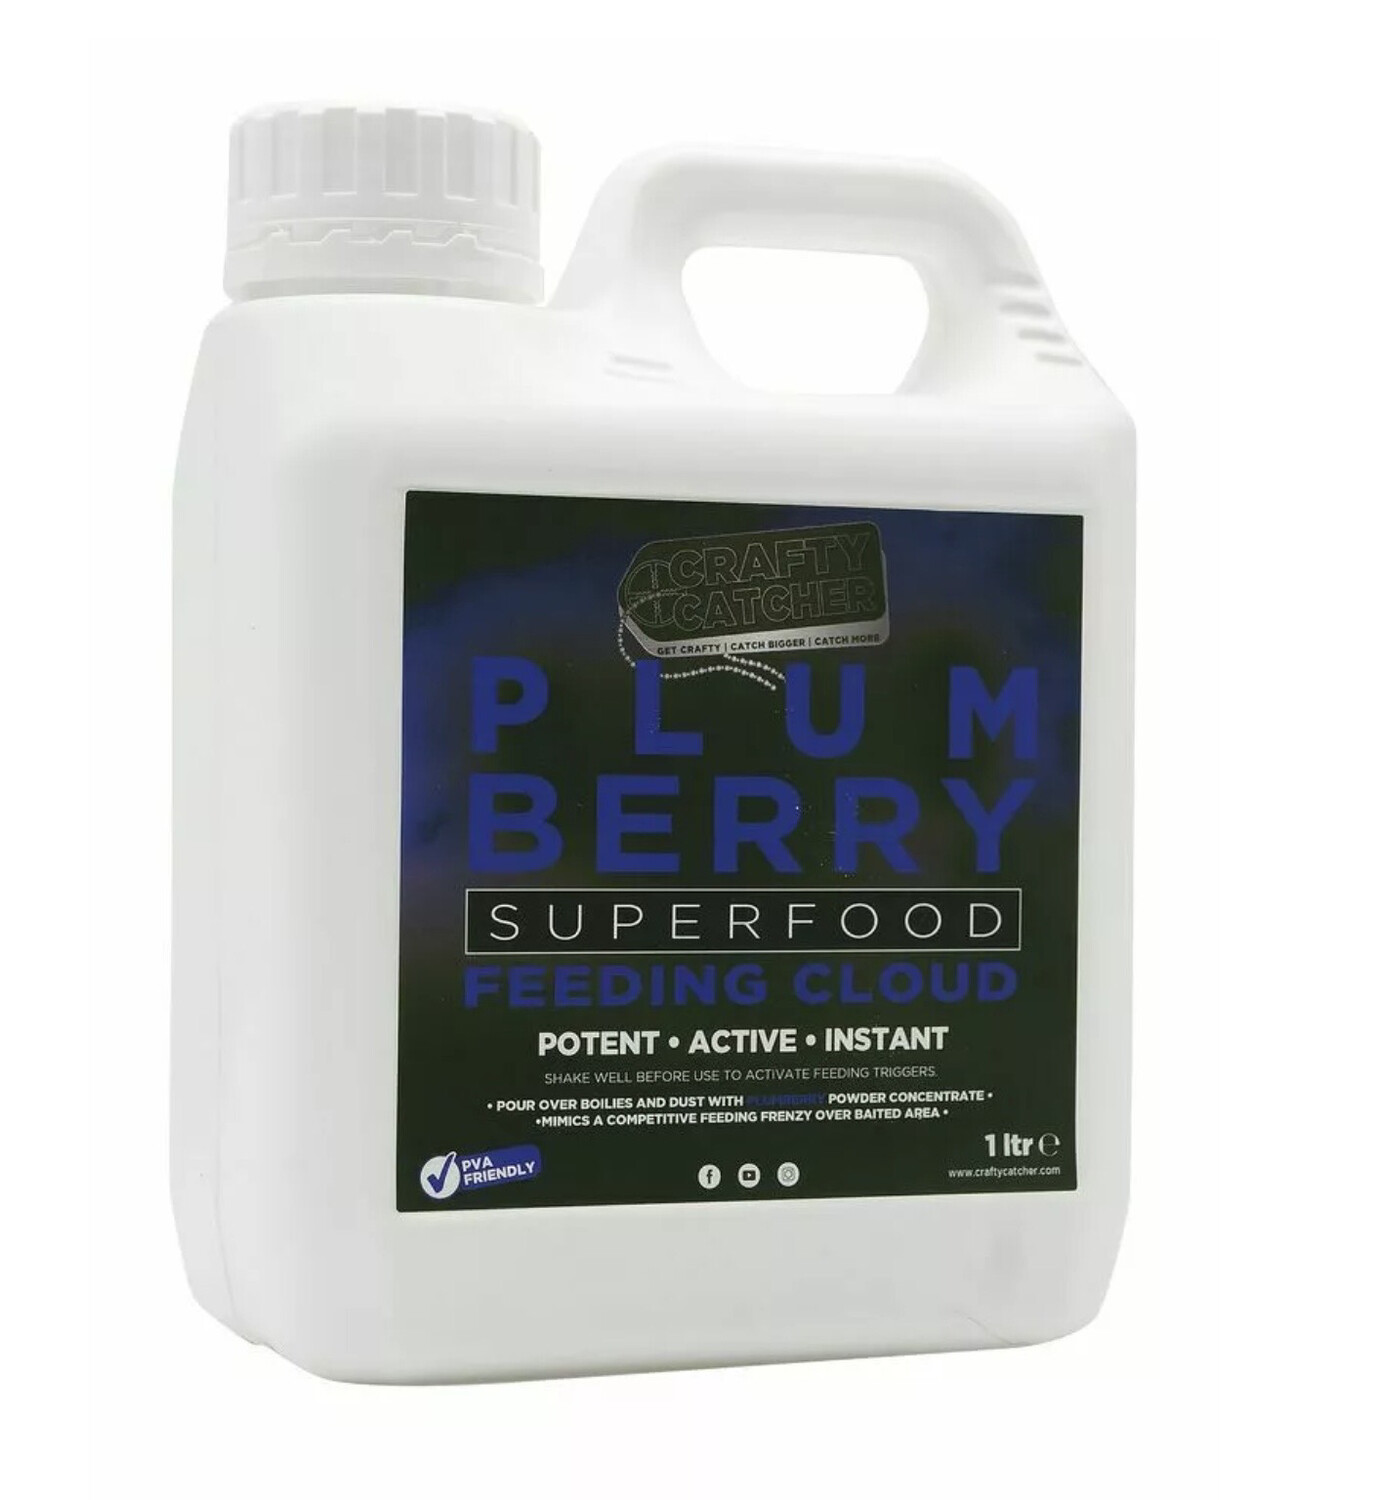 Crafty Catcher Superfood PLUMBERRY Feeding Cloud 1LTR